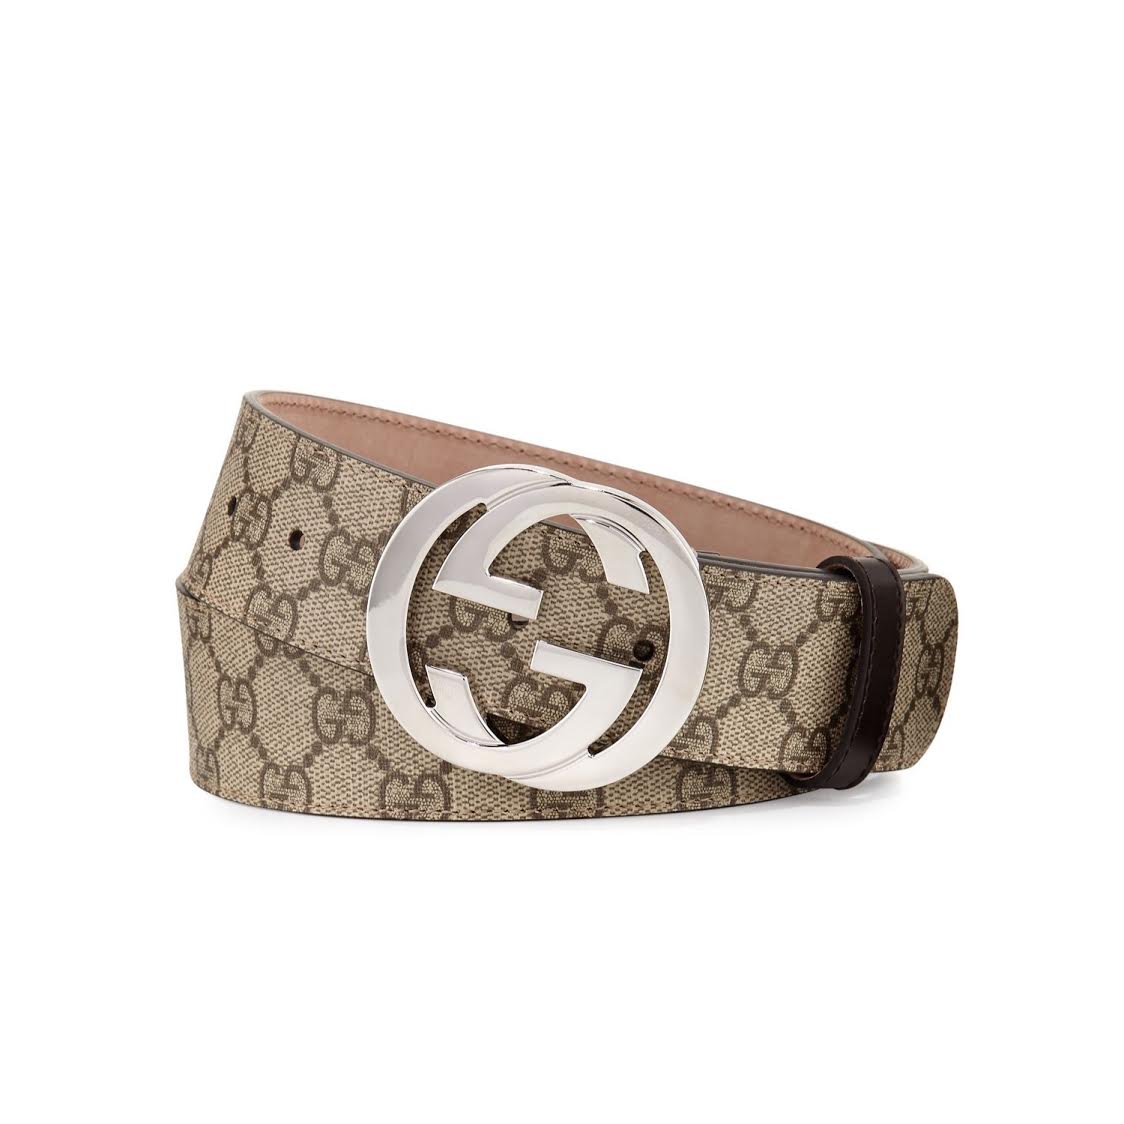 Gg supreme leather belt by Gucci